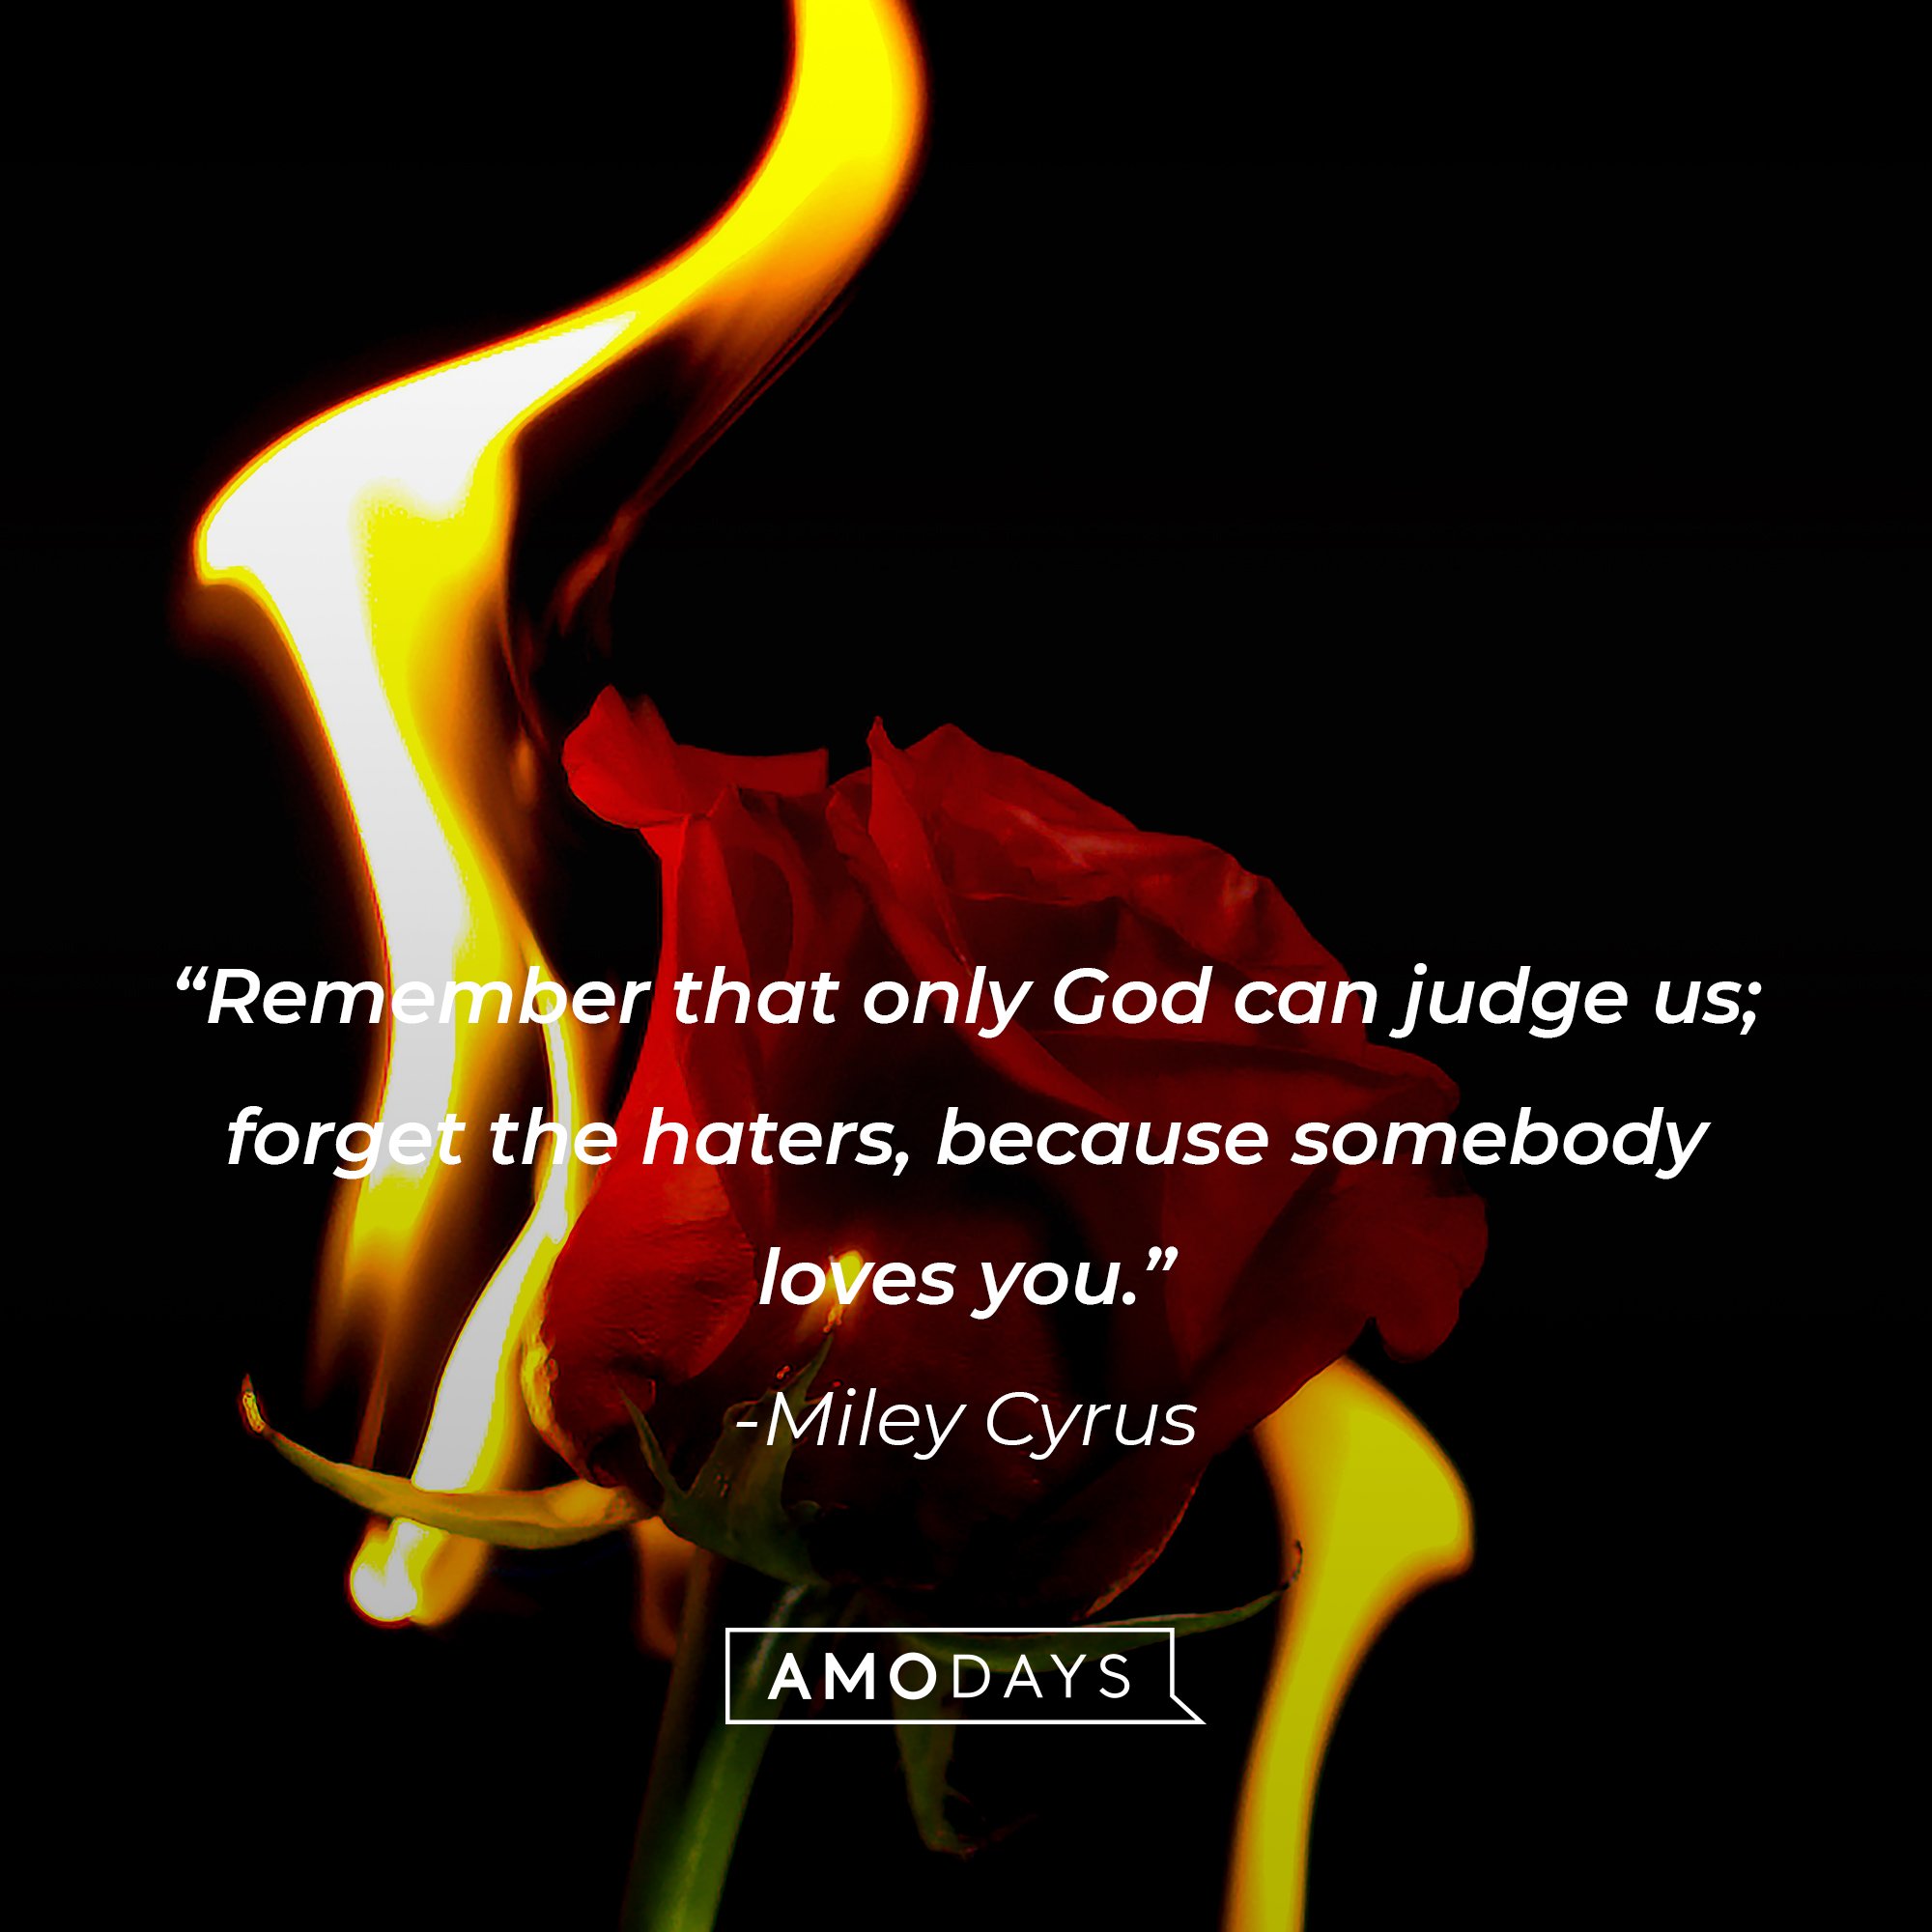 Miley Cyrus quote: “Remember that only God can judge us; forget the haters, because Somebody loves you.” | Image: Amodays    